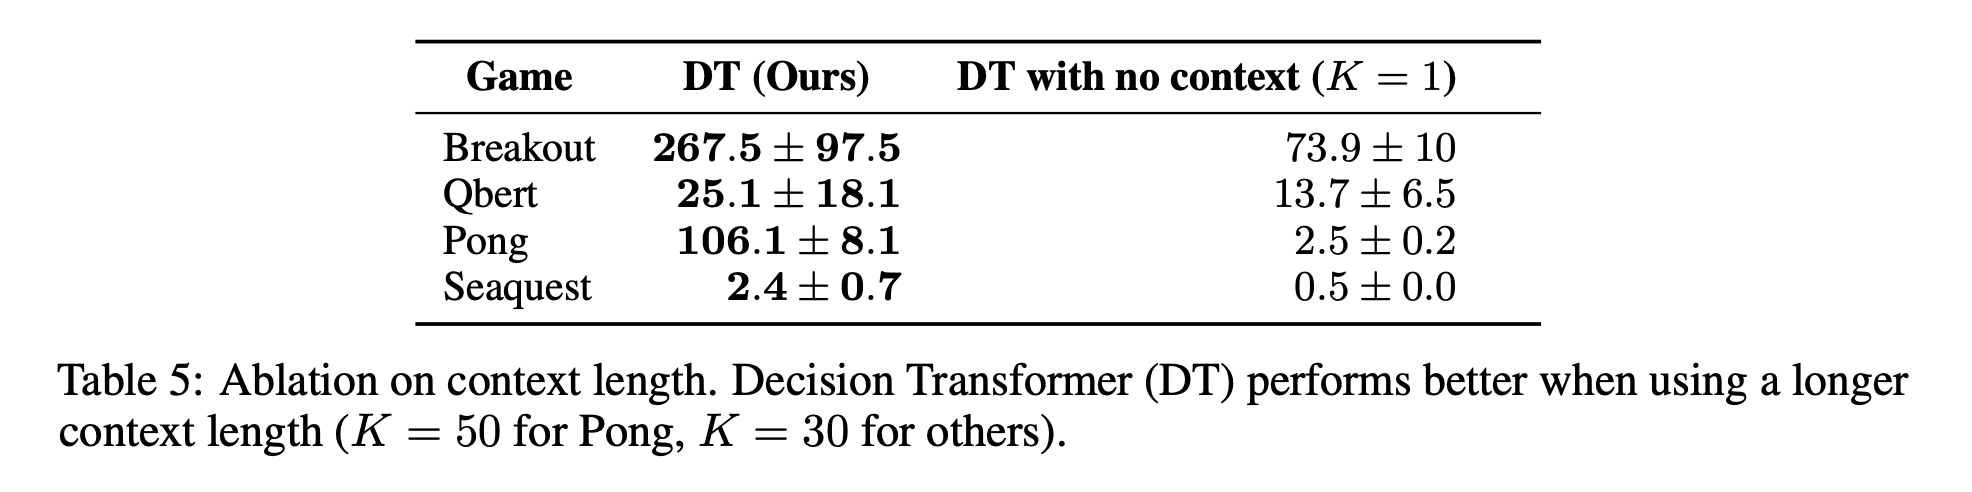 ../assets/post_files/2021-06-29-decision-transformer/Untitled%208.png